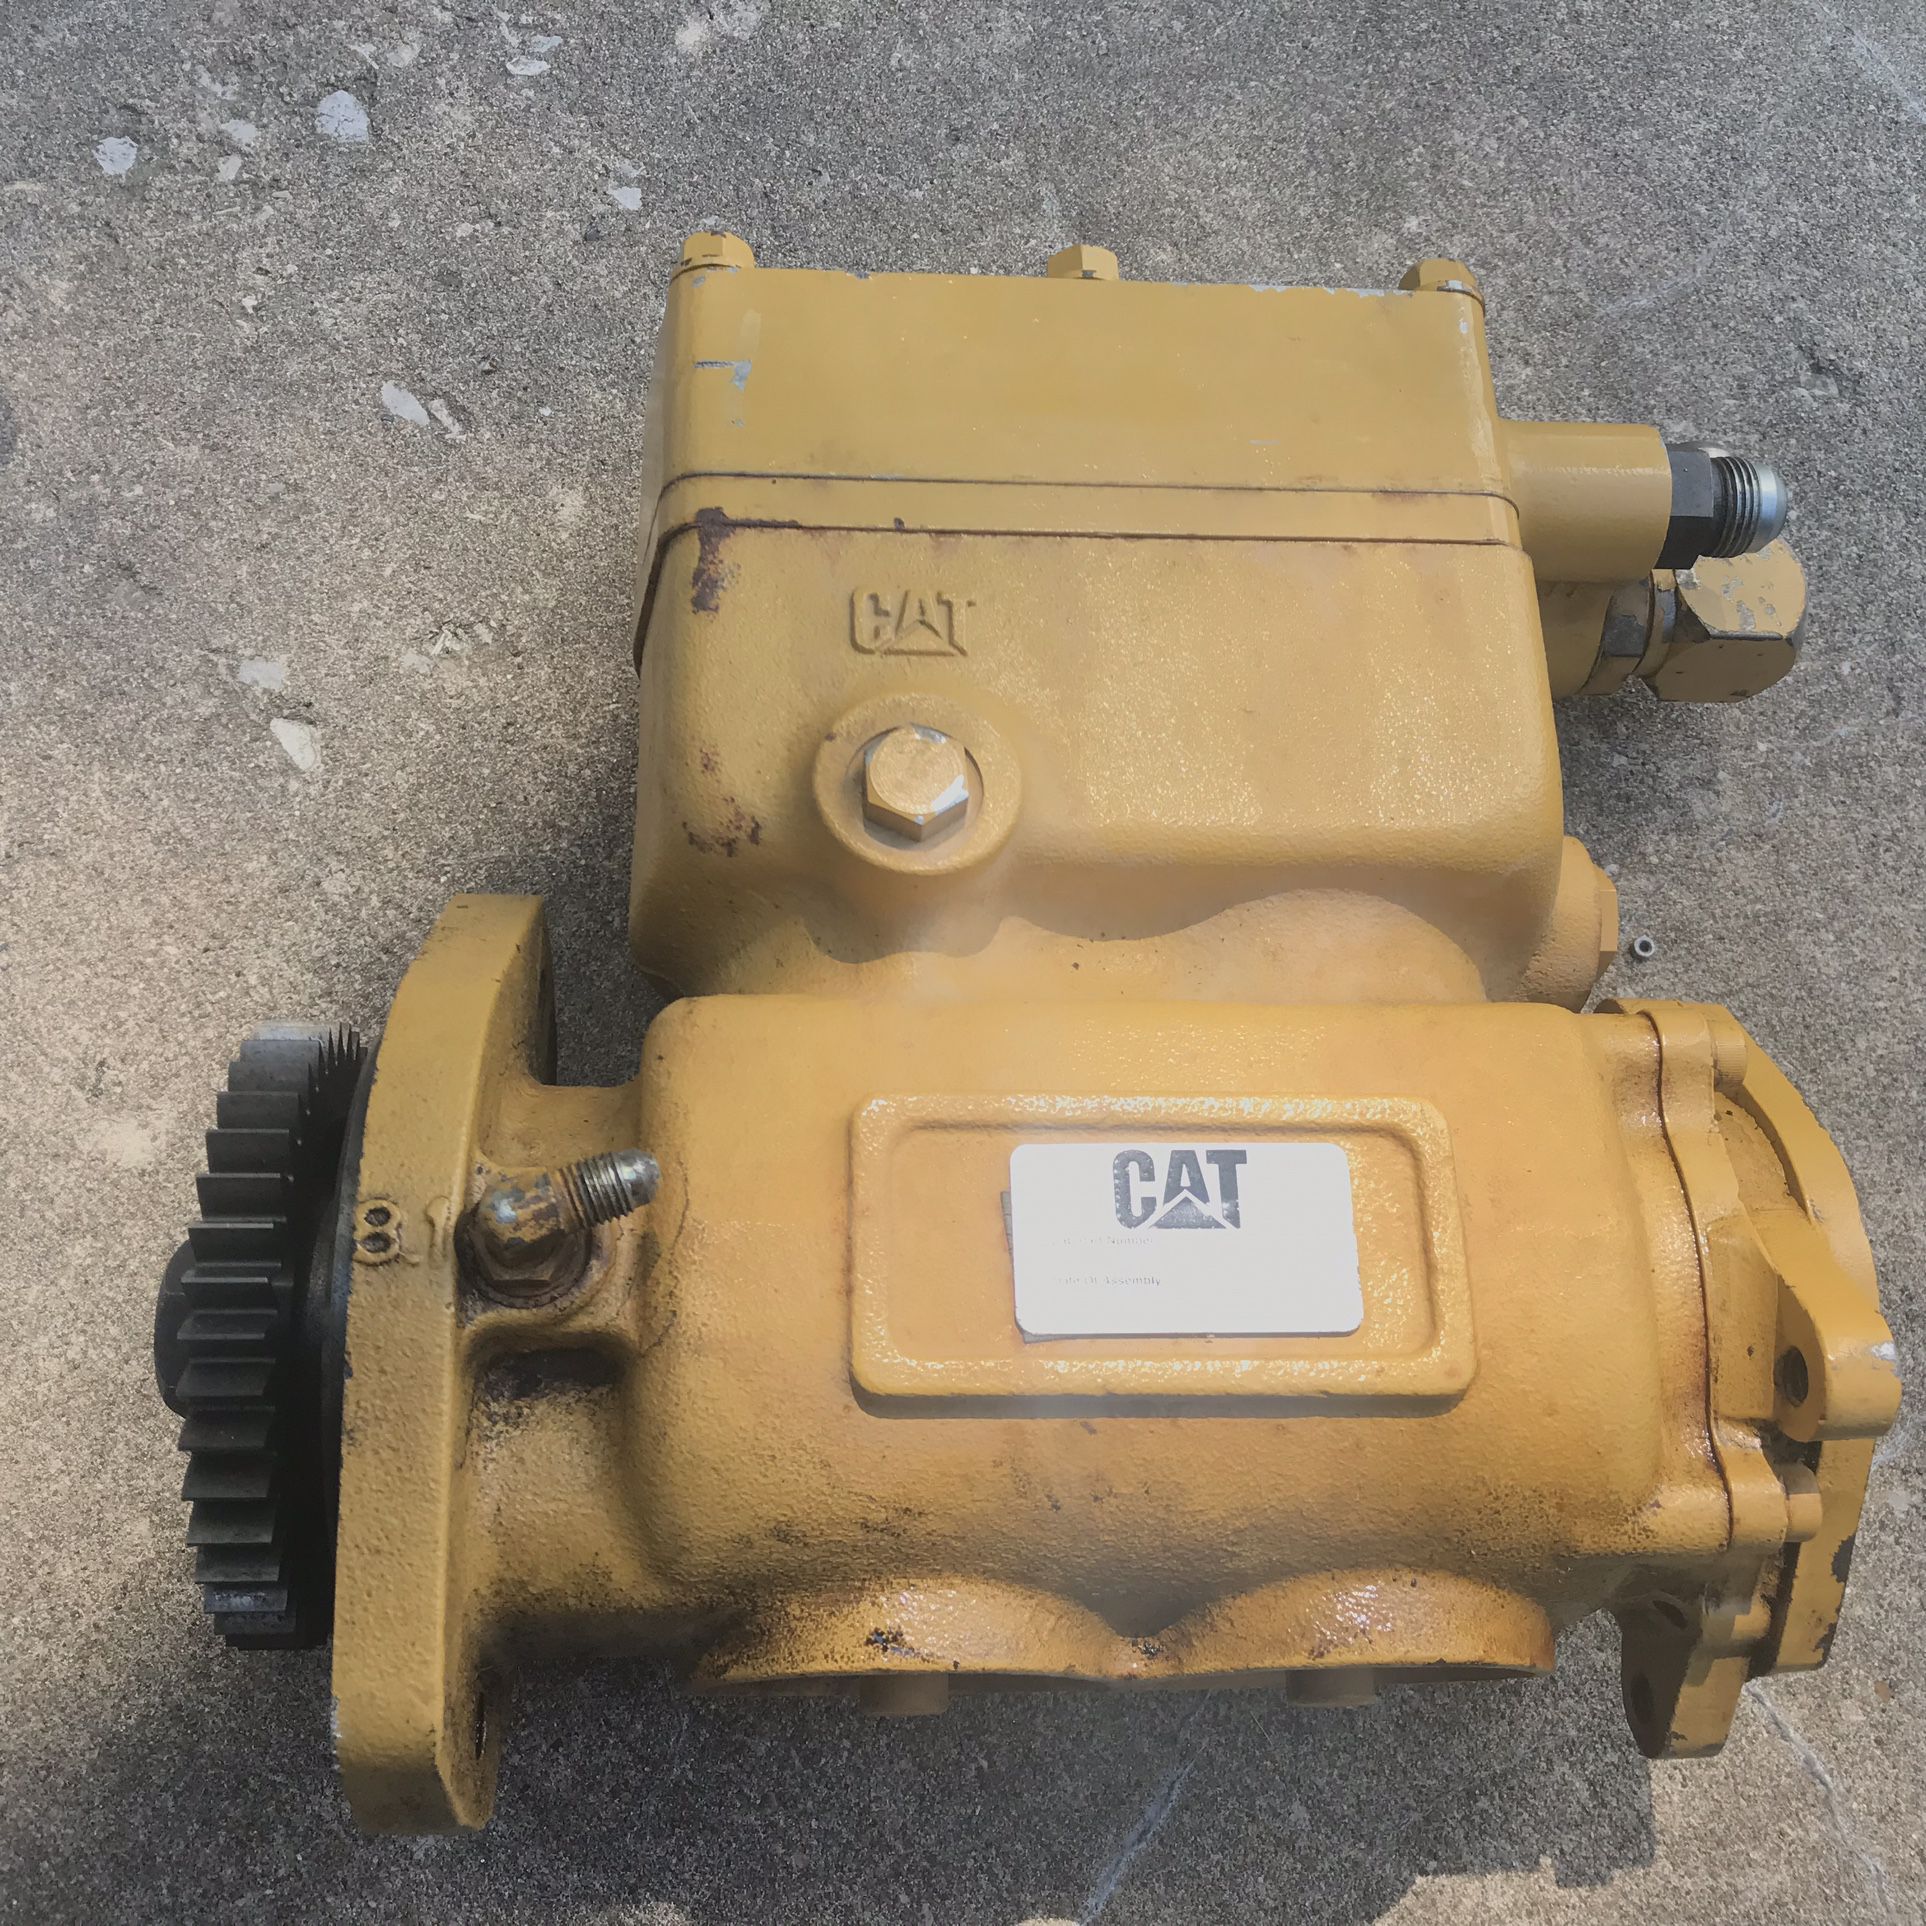 USED OEM CATERPILLAR/ CAT AIR COMPRESSOR PN# (contact info removed) 